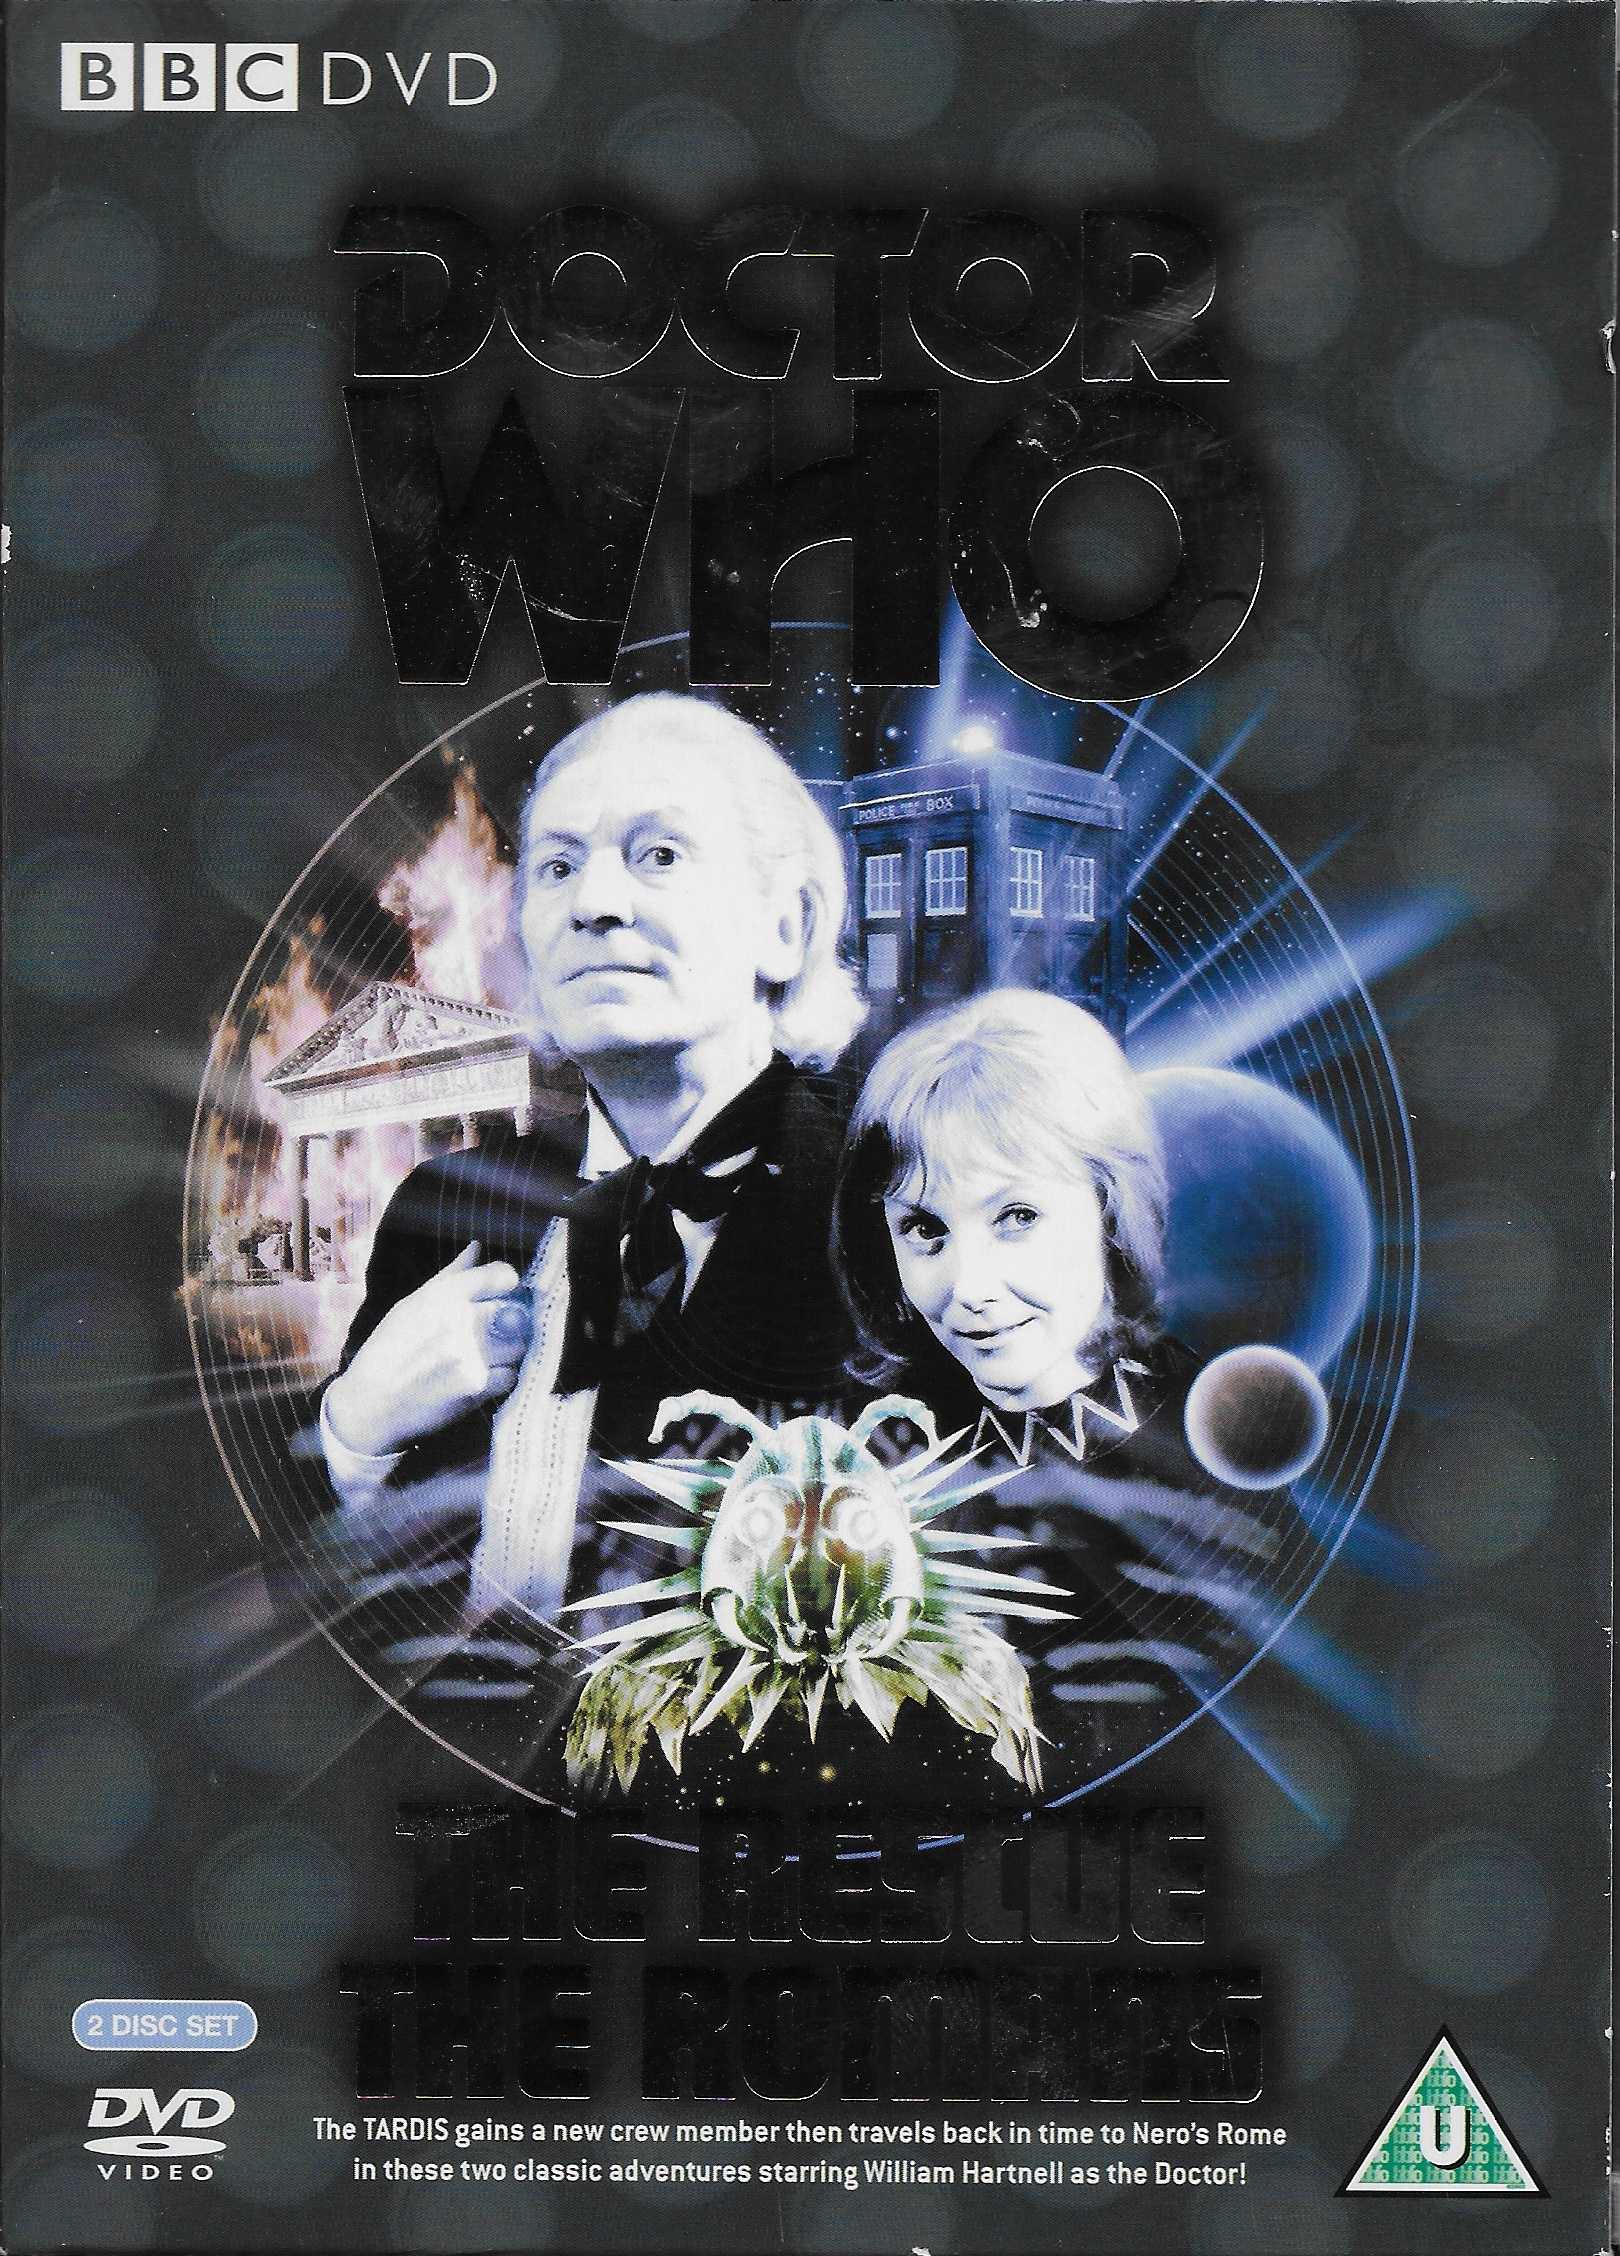 Picture of BBCDVD 2698 Doctor Who - The rescue / The Romans boxed set by artist Terry Nation / Dennis Spooner from the BBC dvds - Records and Tapes library